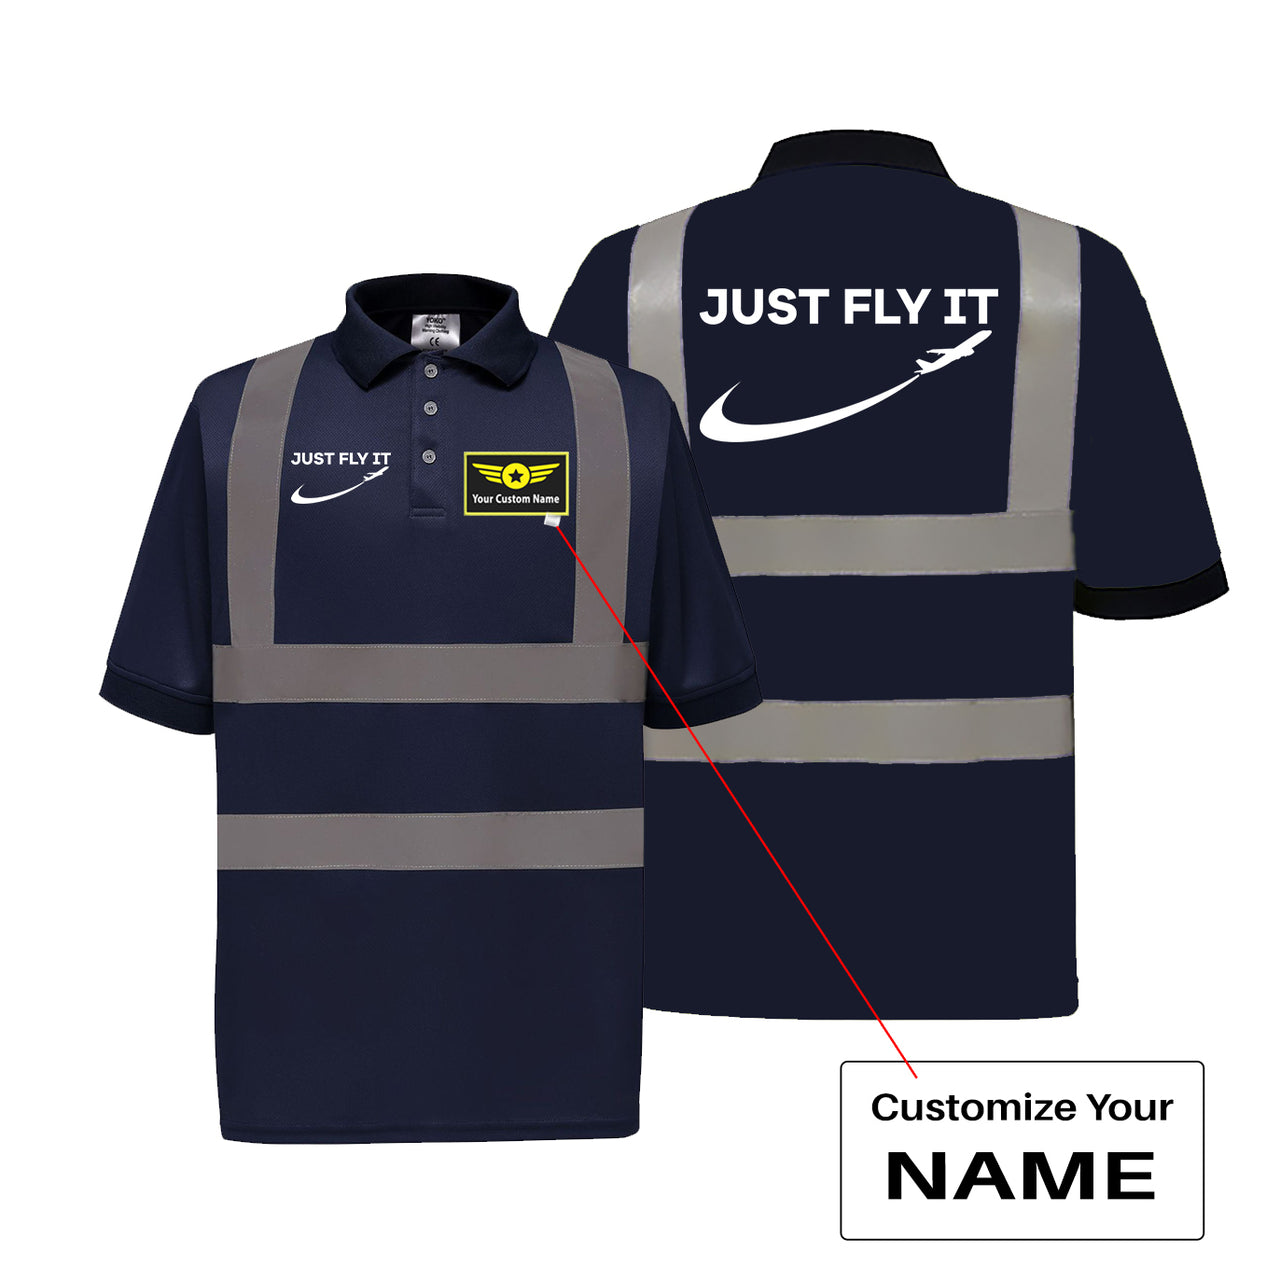 Just Fly It 2 Designed Reflective Polo T-Shirts